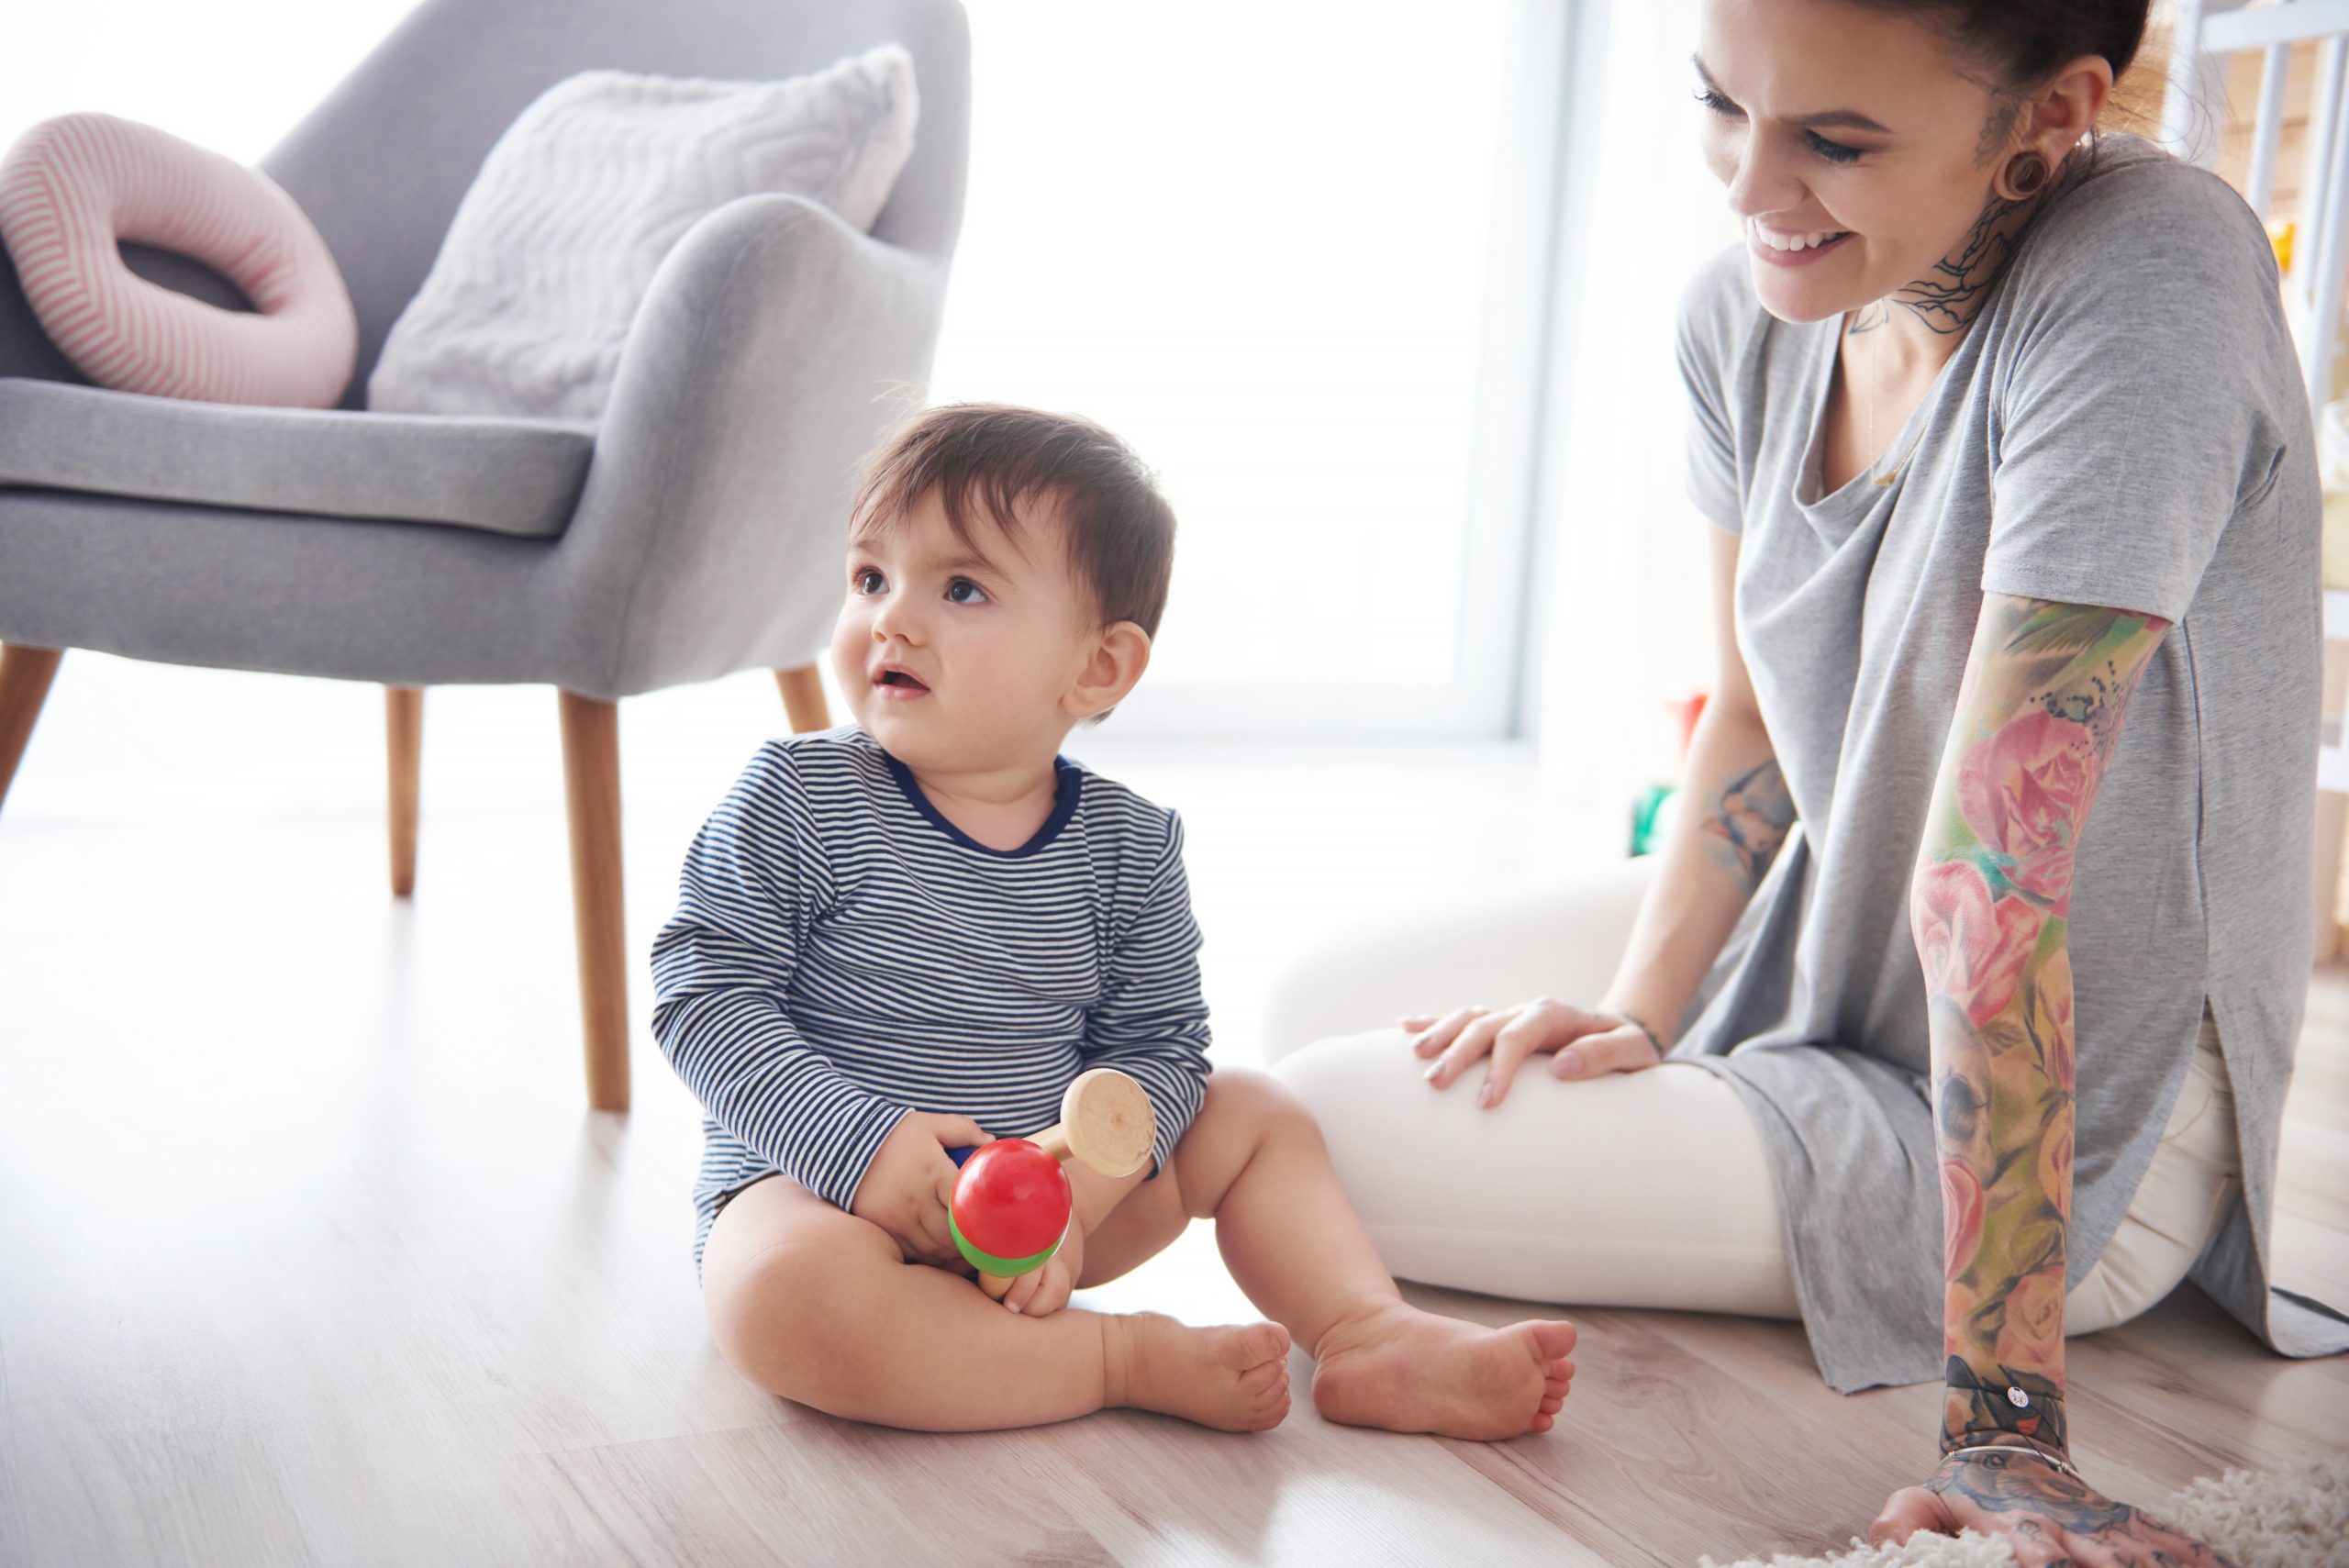 Photograph of a young parent sitting on the floor next to their baby, who is holding a toy